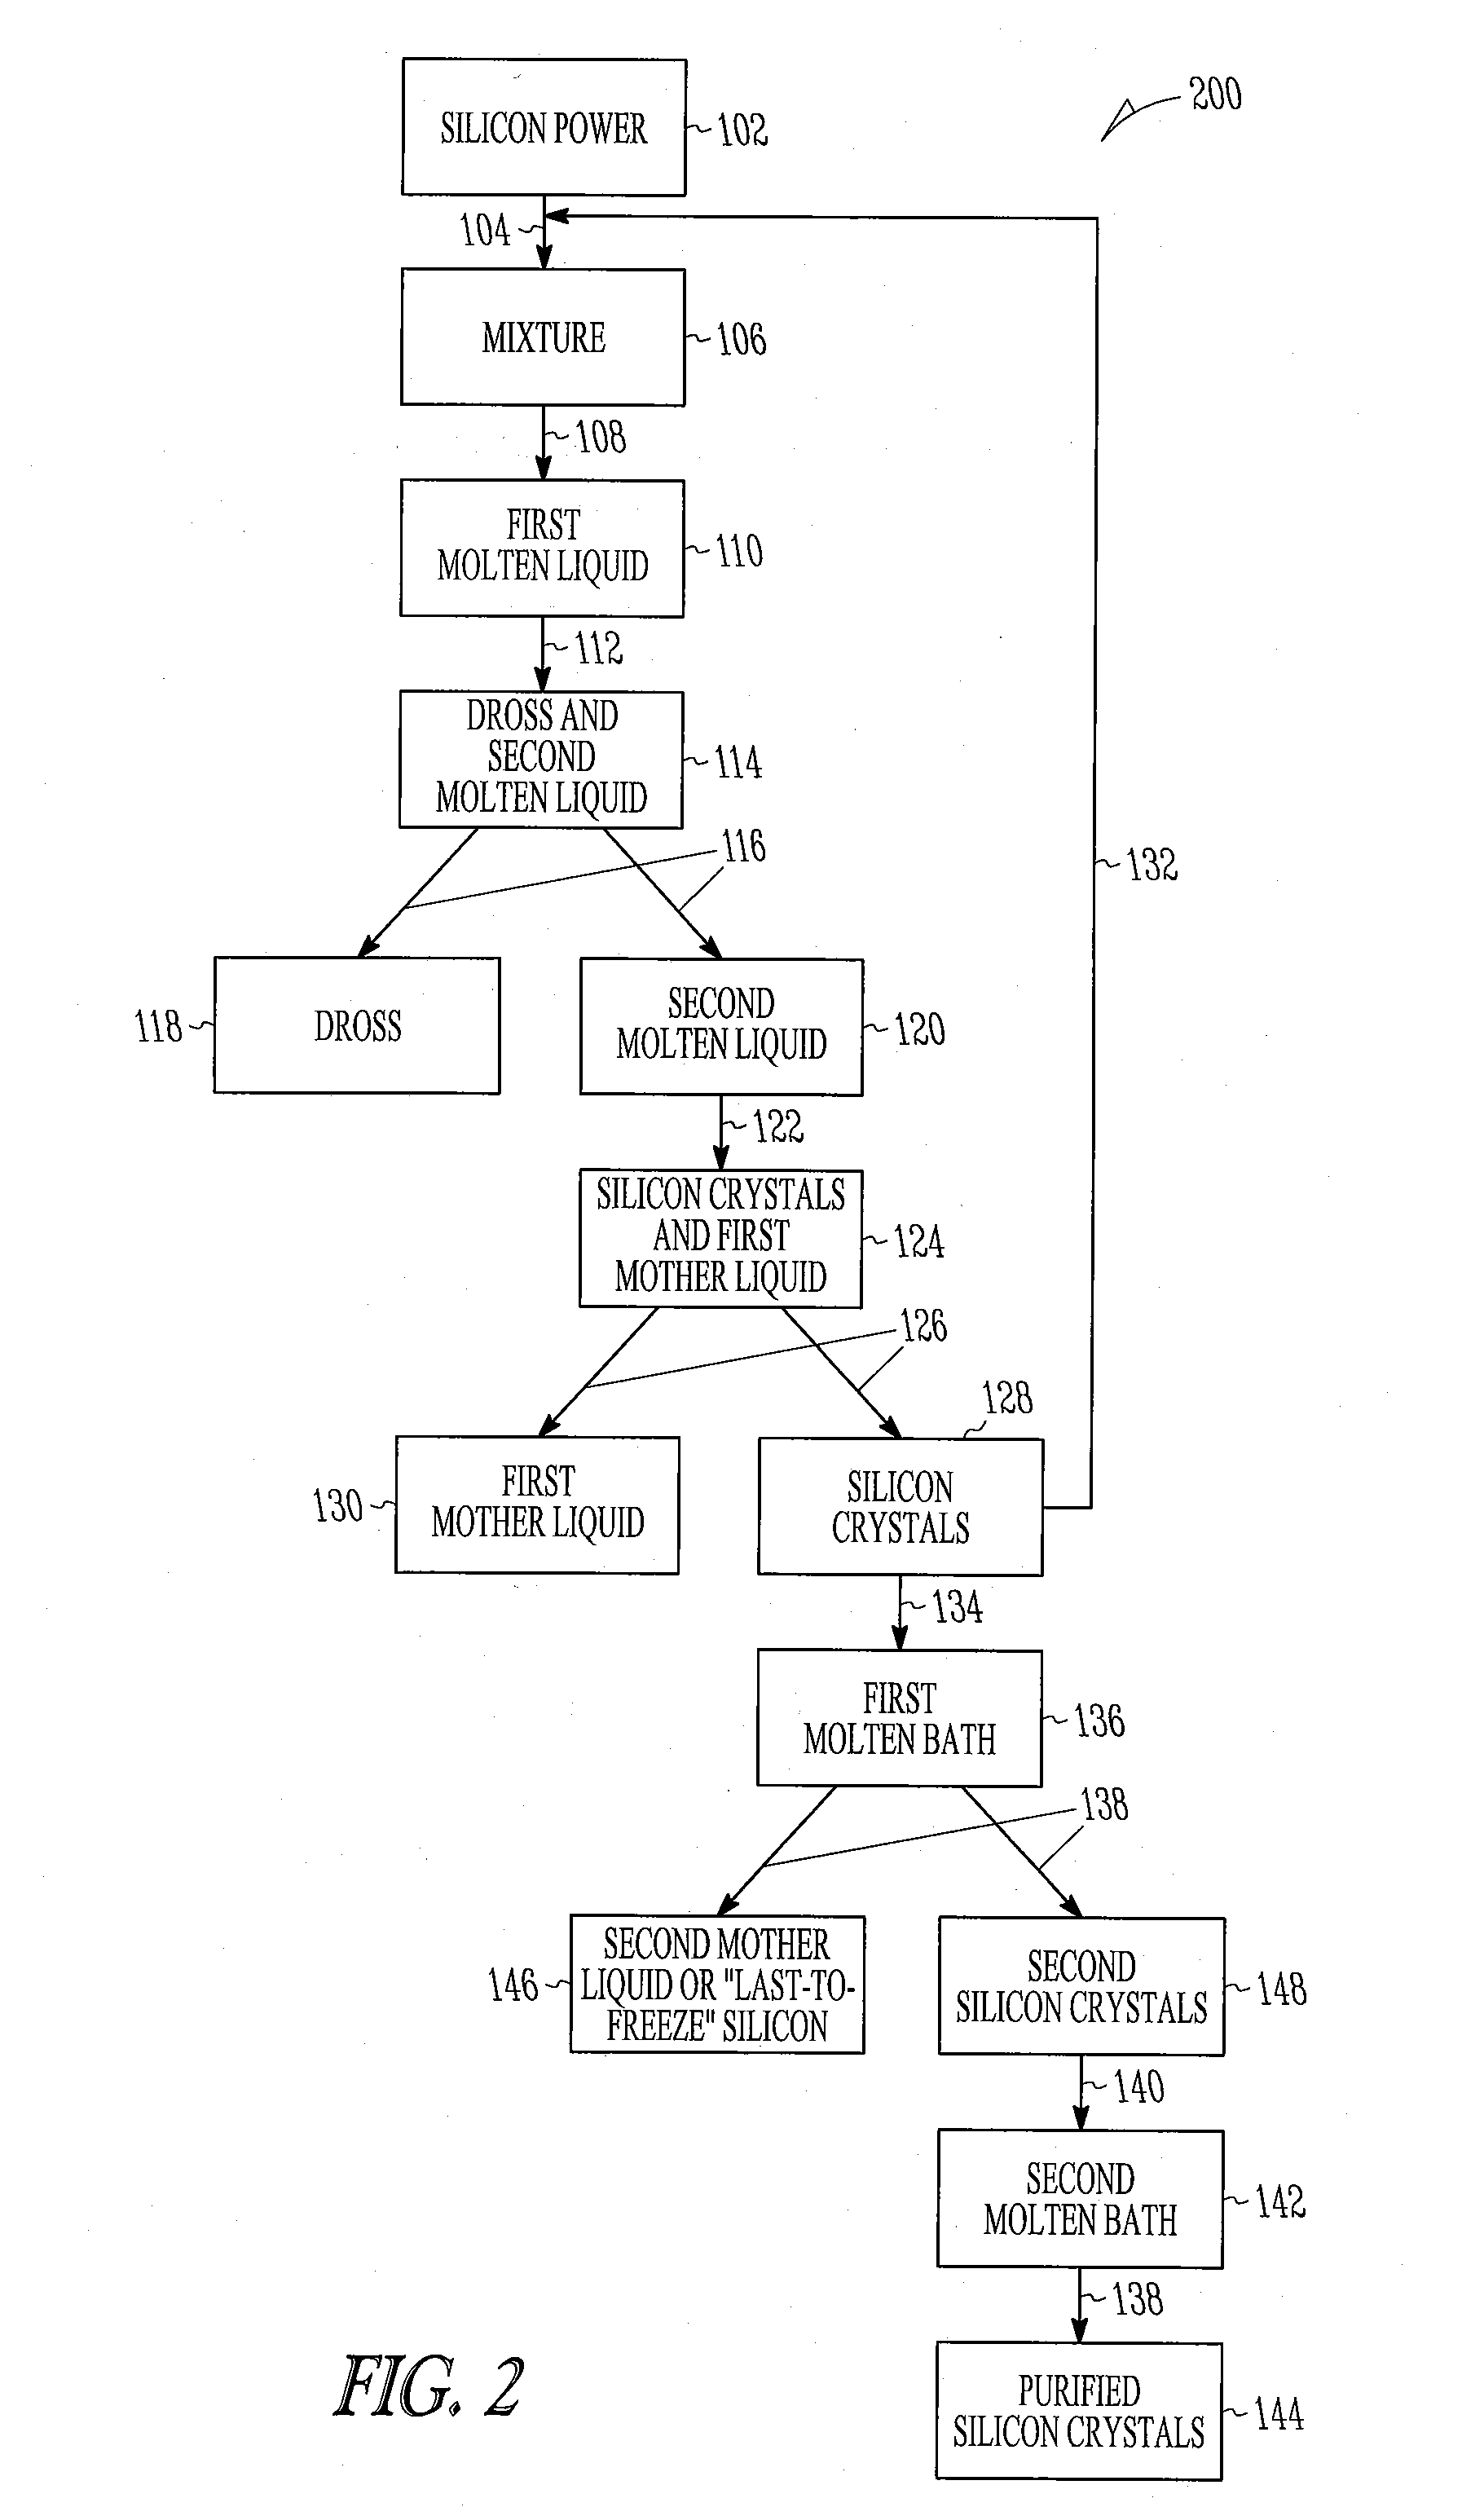 Method for processing silicon powder to obtain silicon crystals